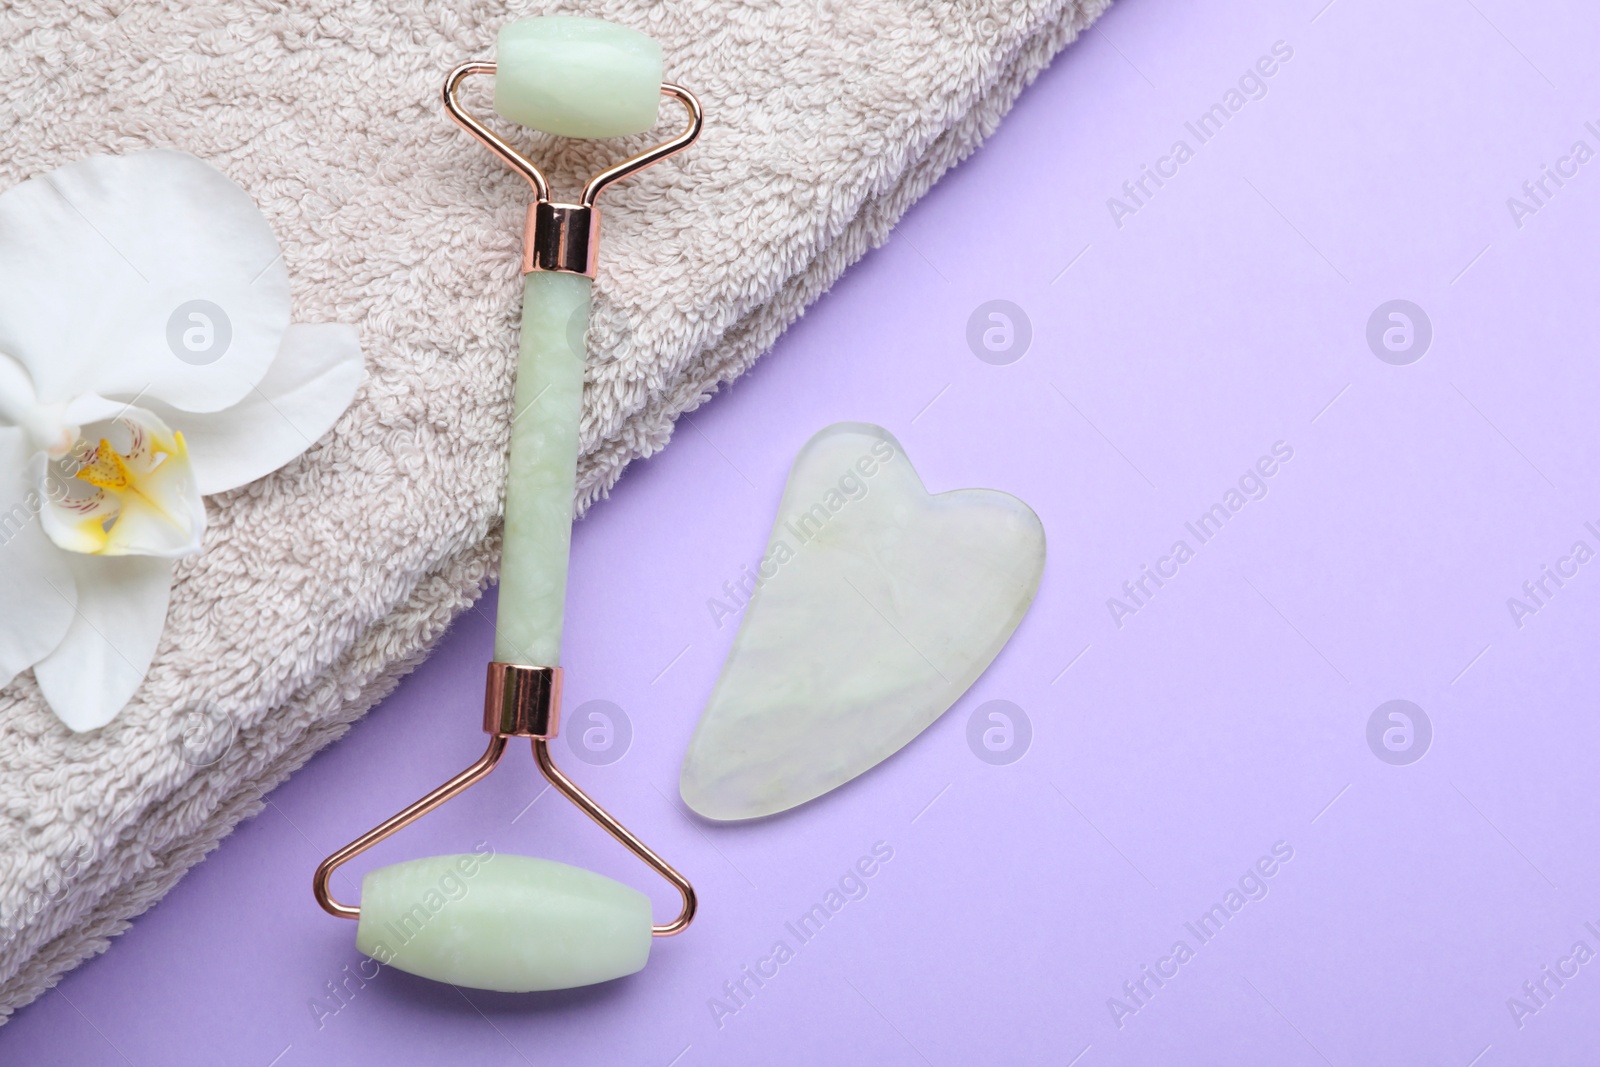 Photo of Gua sha stone, face roller, towel and orchid flower on violet background, flat lay. Space for text